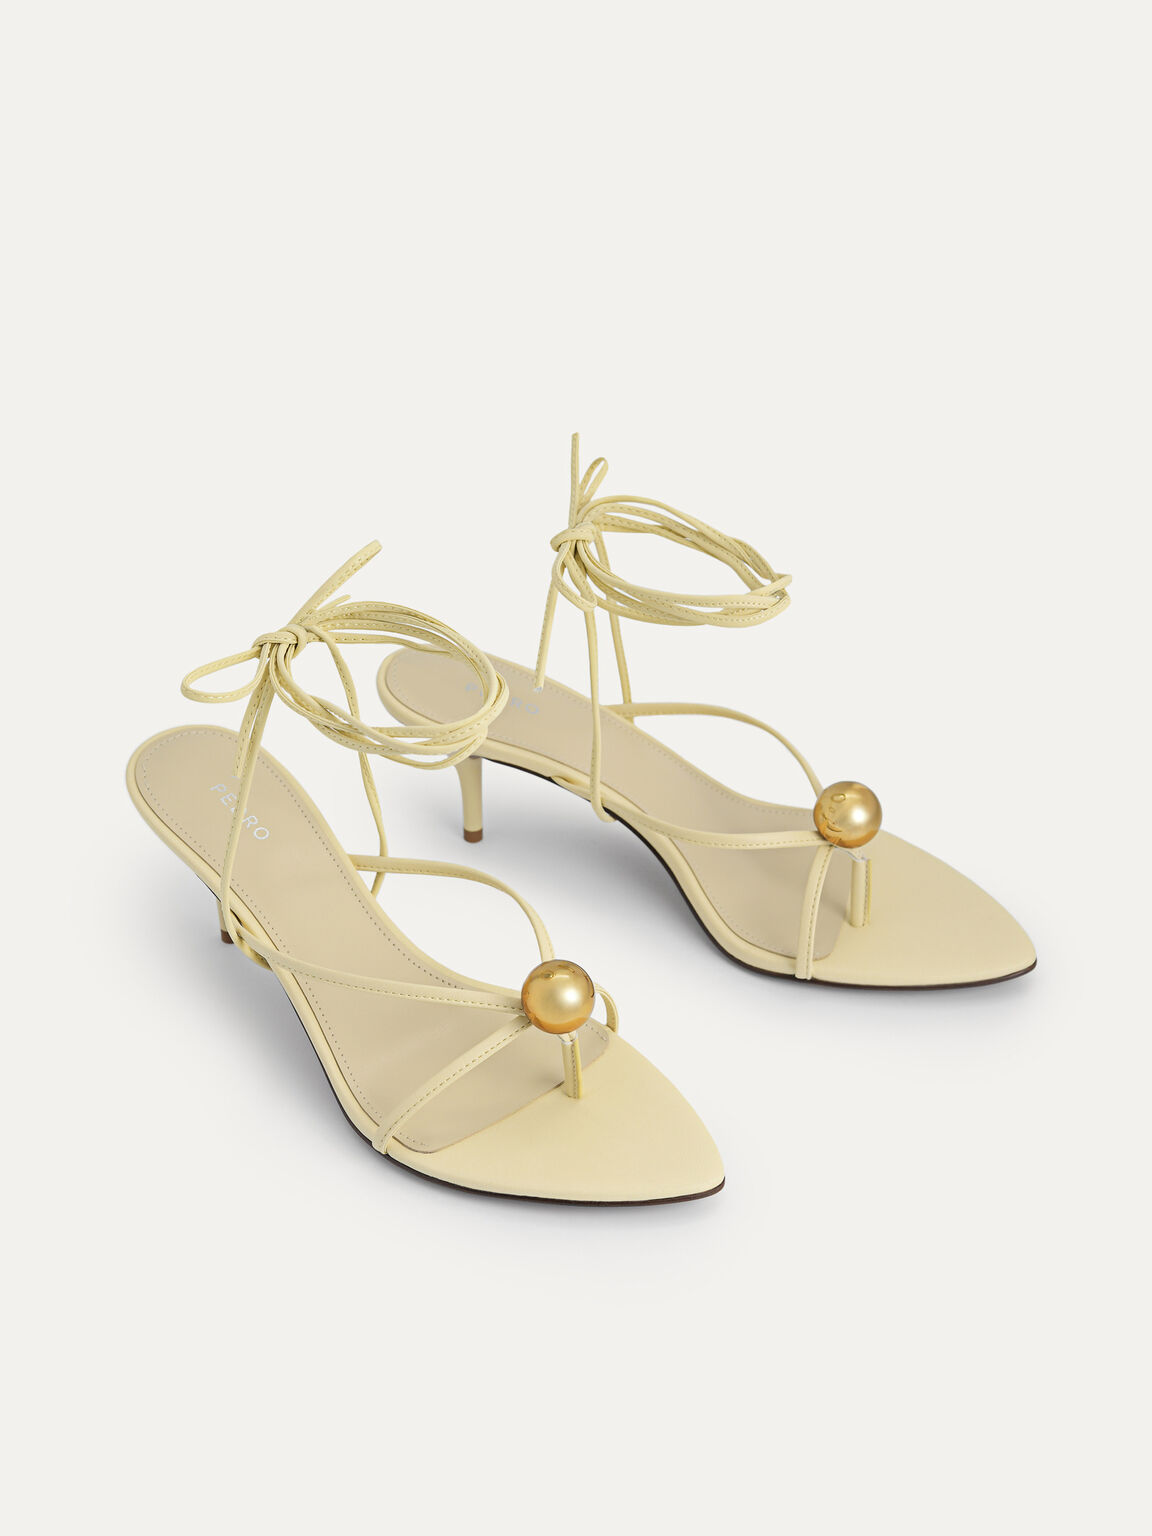 Orb Lace-Up Heel Sandals, Light Yellow